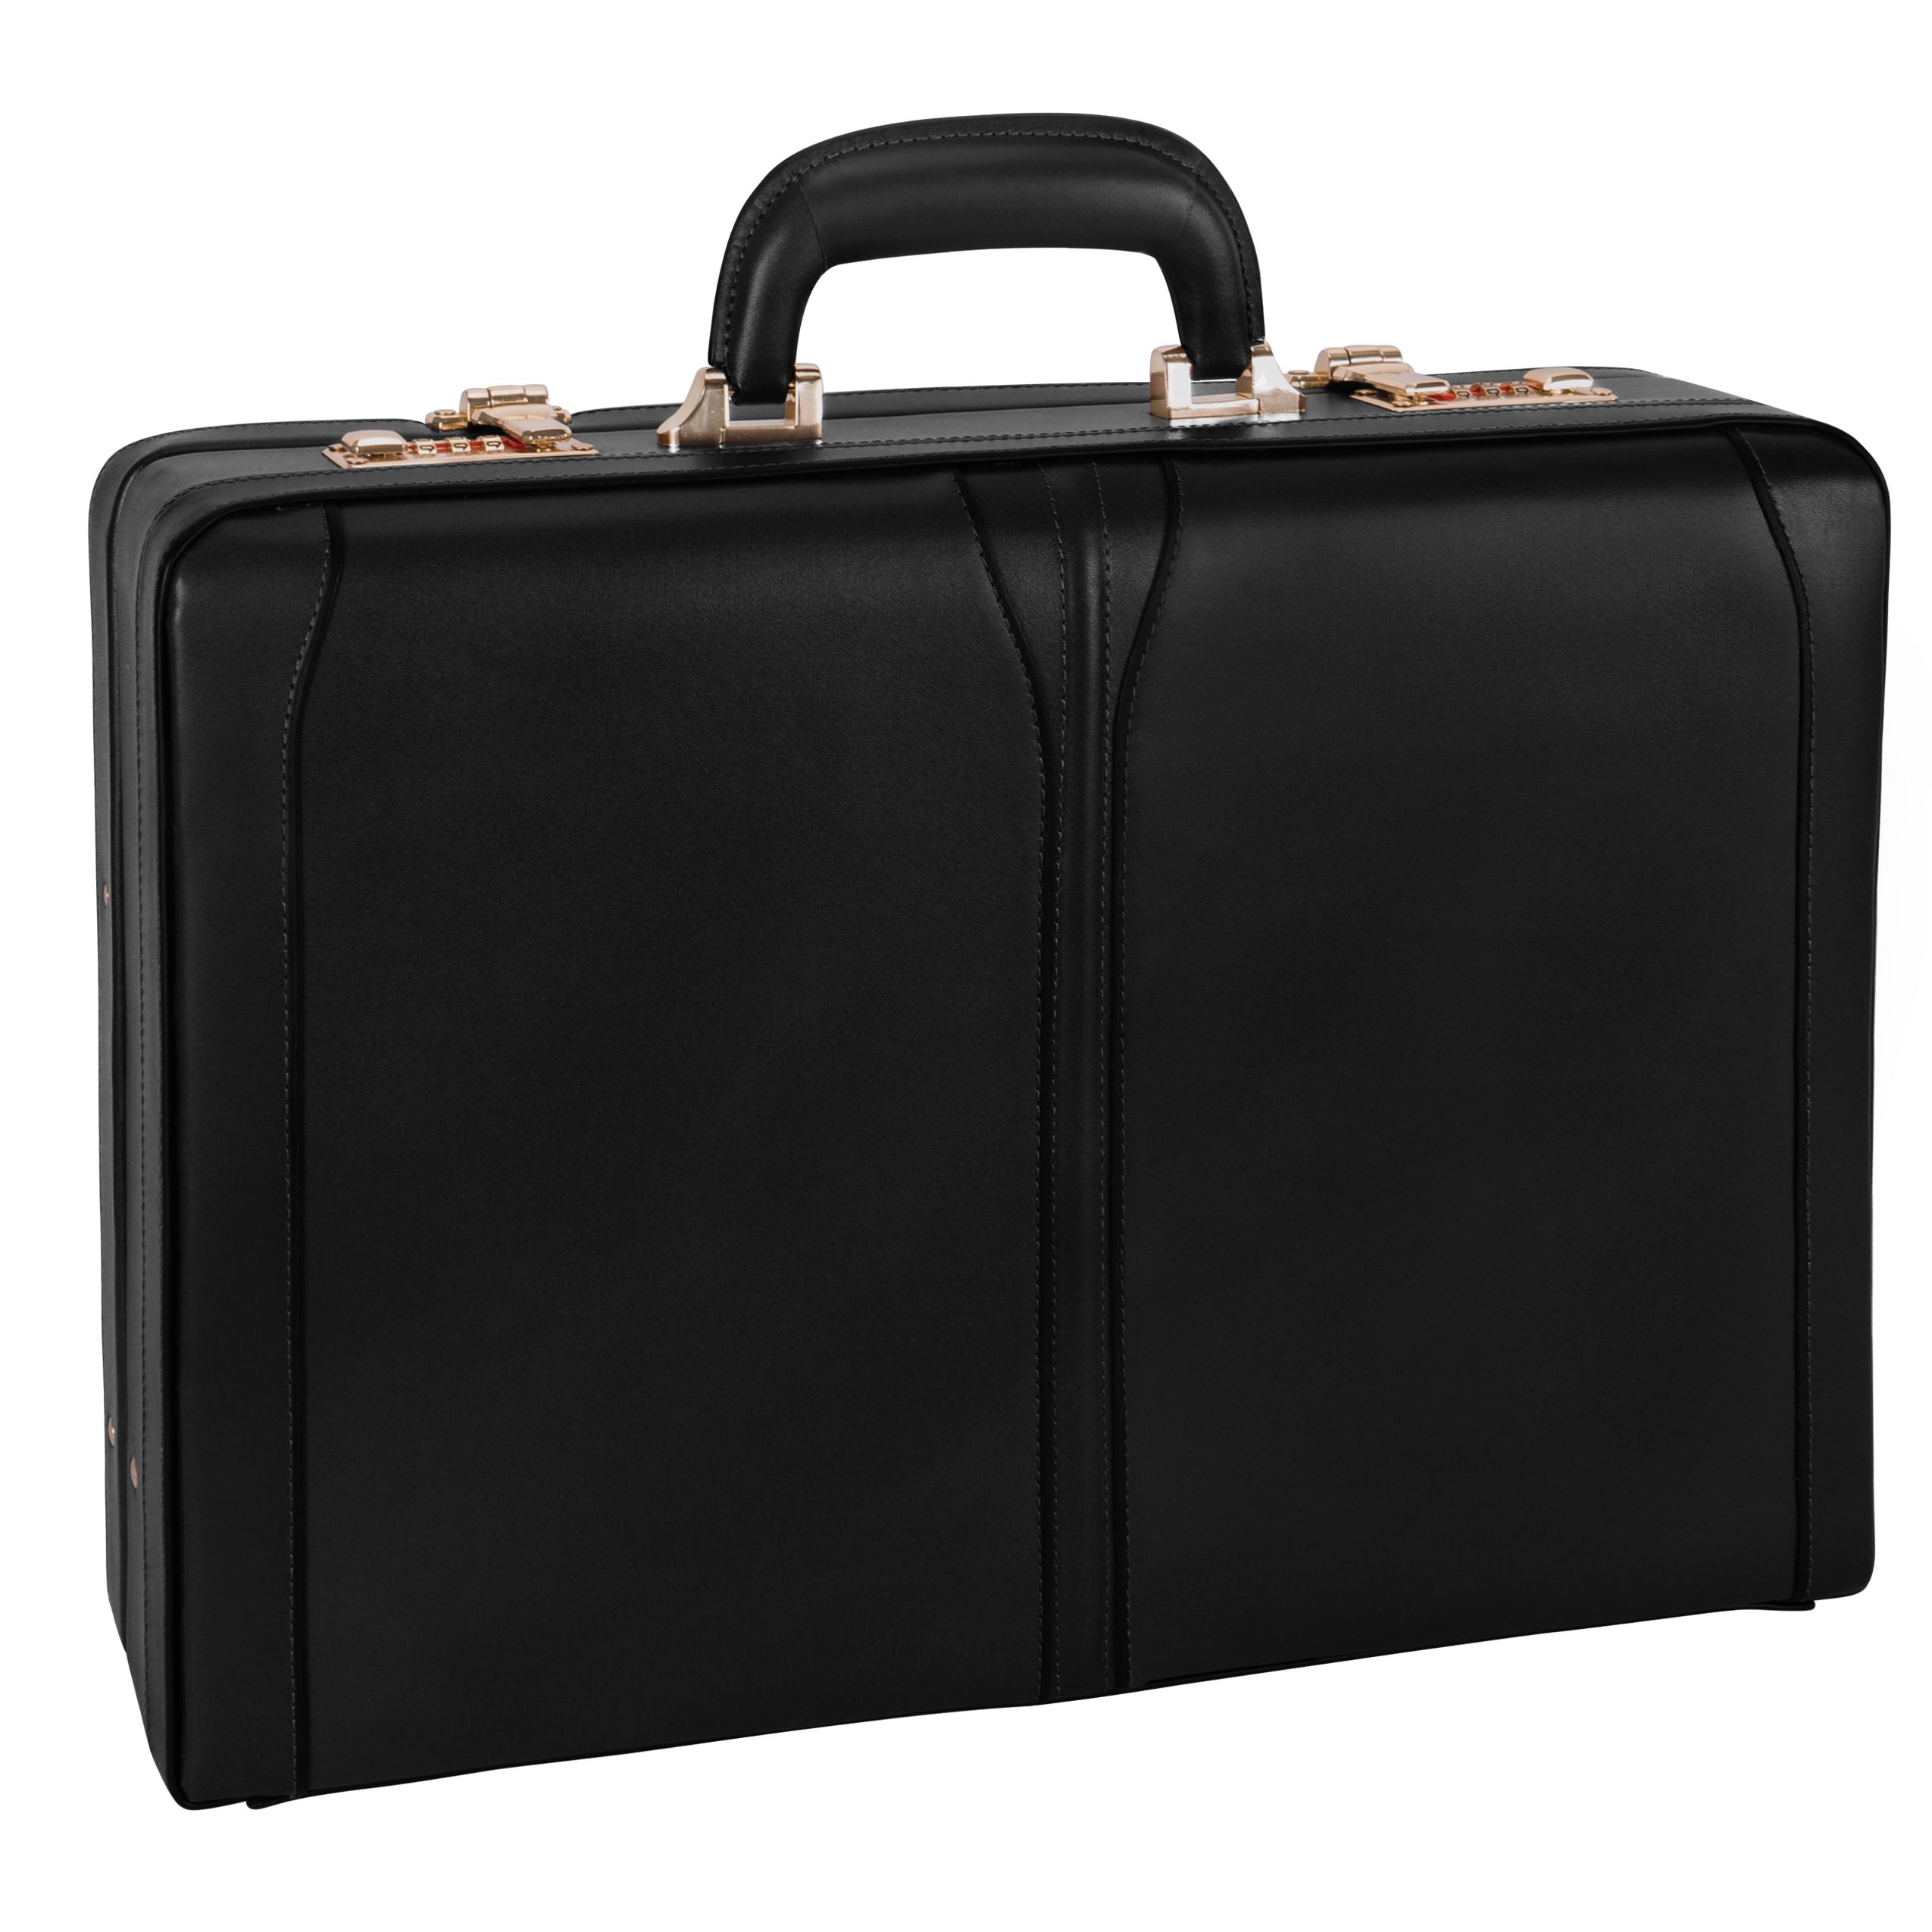 Picture of McKlein TURNER 80485 Black Leather Expandable Attache Case